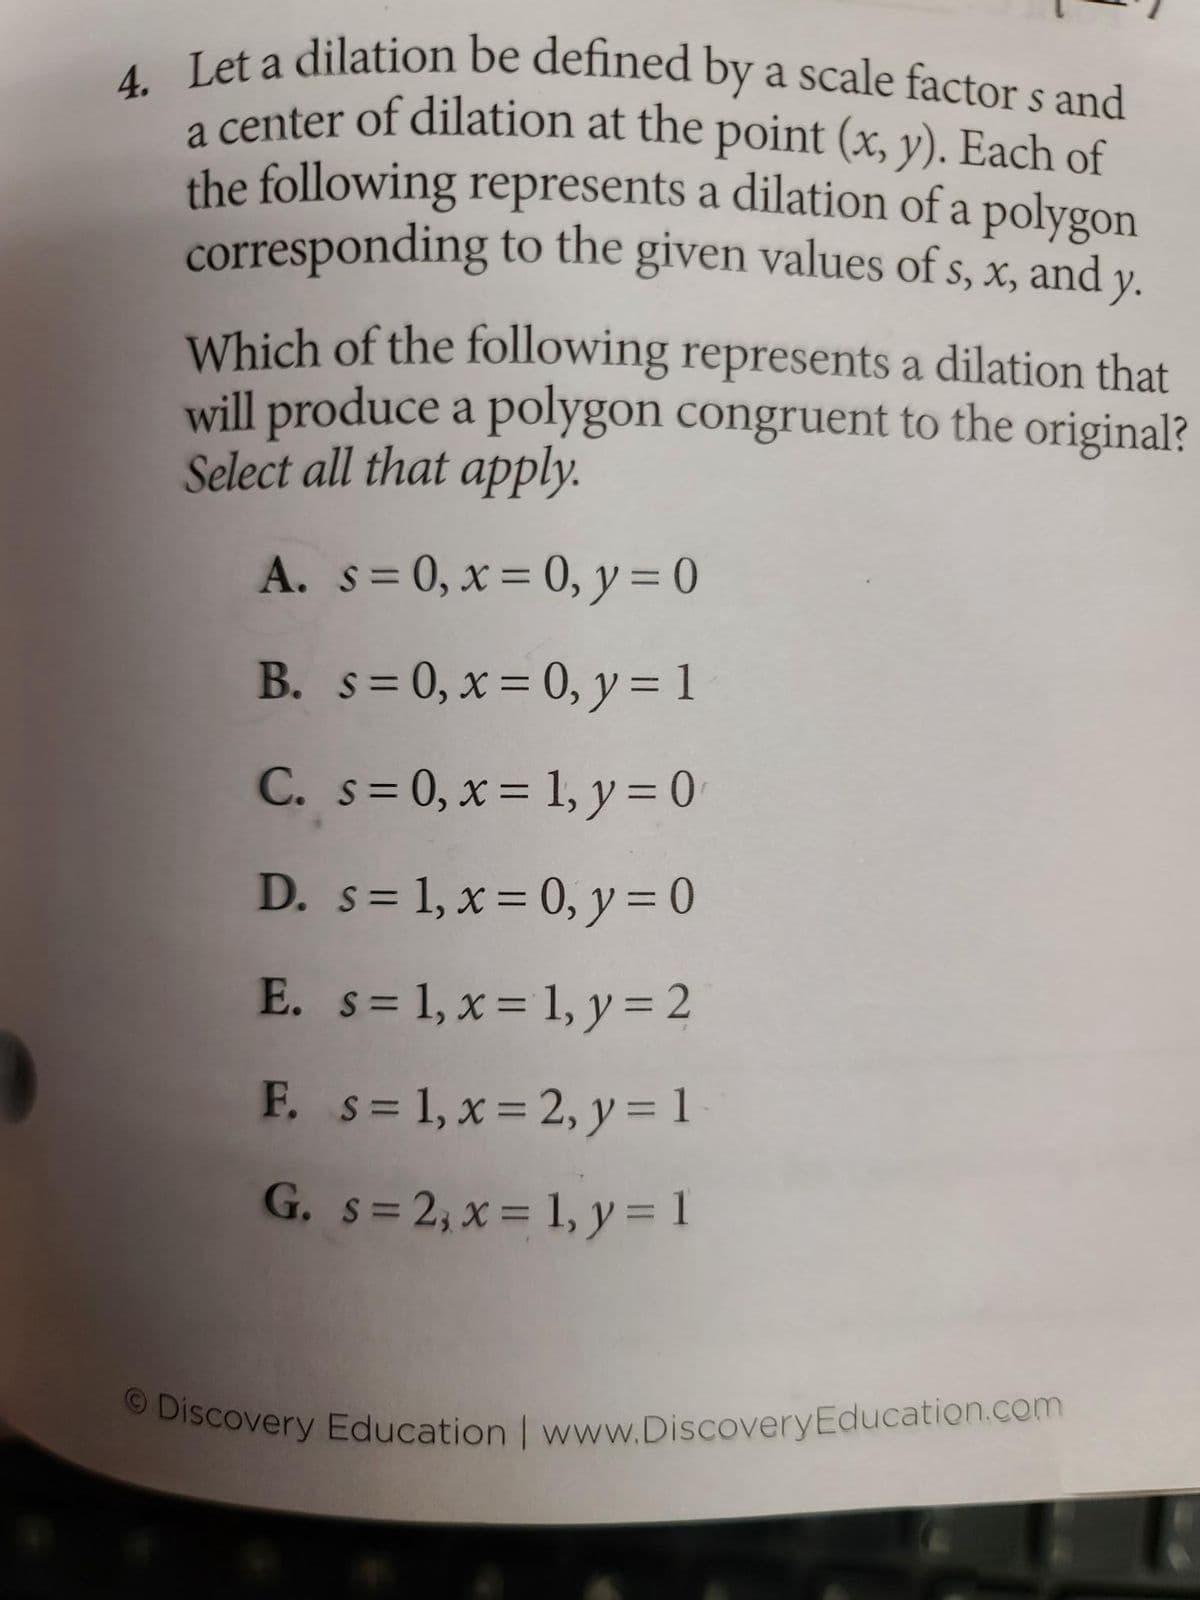 4. Let a dilation be defined by a scale factors and
a center of dilation at the point (x, y). Each of
the following represents a dilation of a polygon
corresponding to the given values of s, x, and y.
Which of the following represents a dilation that
will produce a polygon congruent to the original?
Select all that apply.
A. s=0, x= 0, y = 0
B. s=0, x = 0, y = 1
C.
s=0, x= 1, y = 0
D.
s = 1, x = 0, y = 0
E. s= 1, x = 1, y = 2
F. s= 1, x=2, y = 1
G. s=2, x = 1, y = 1
Discovery Education | www.Discovery Education.com